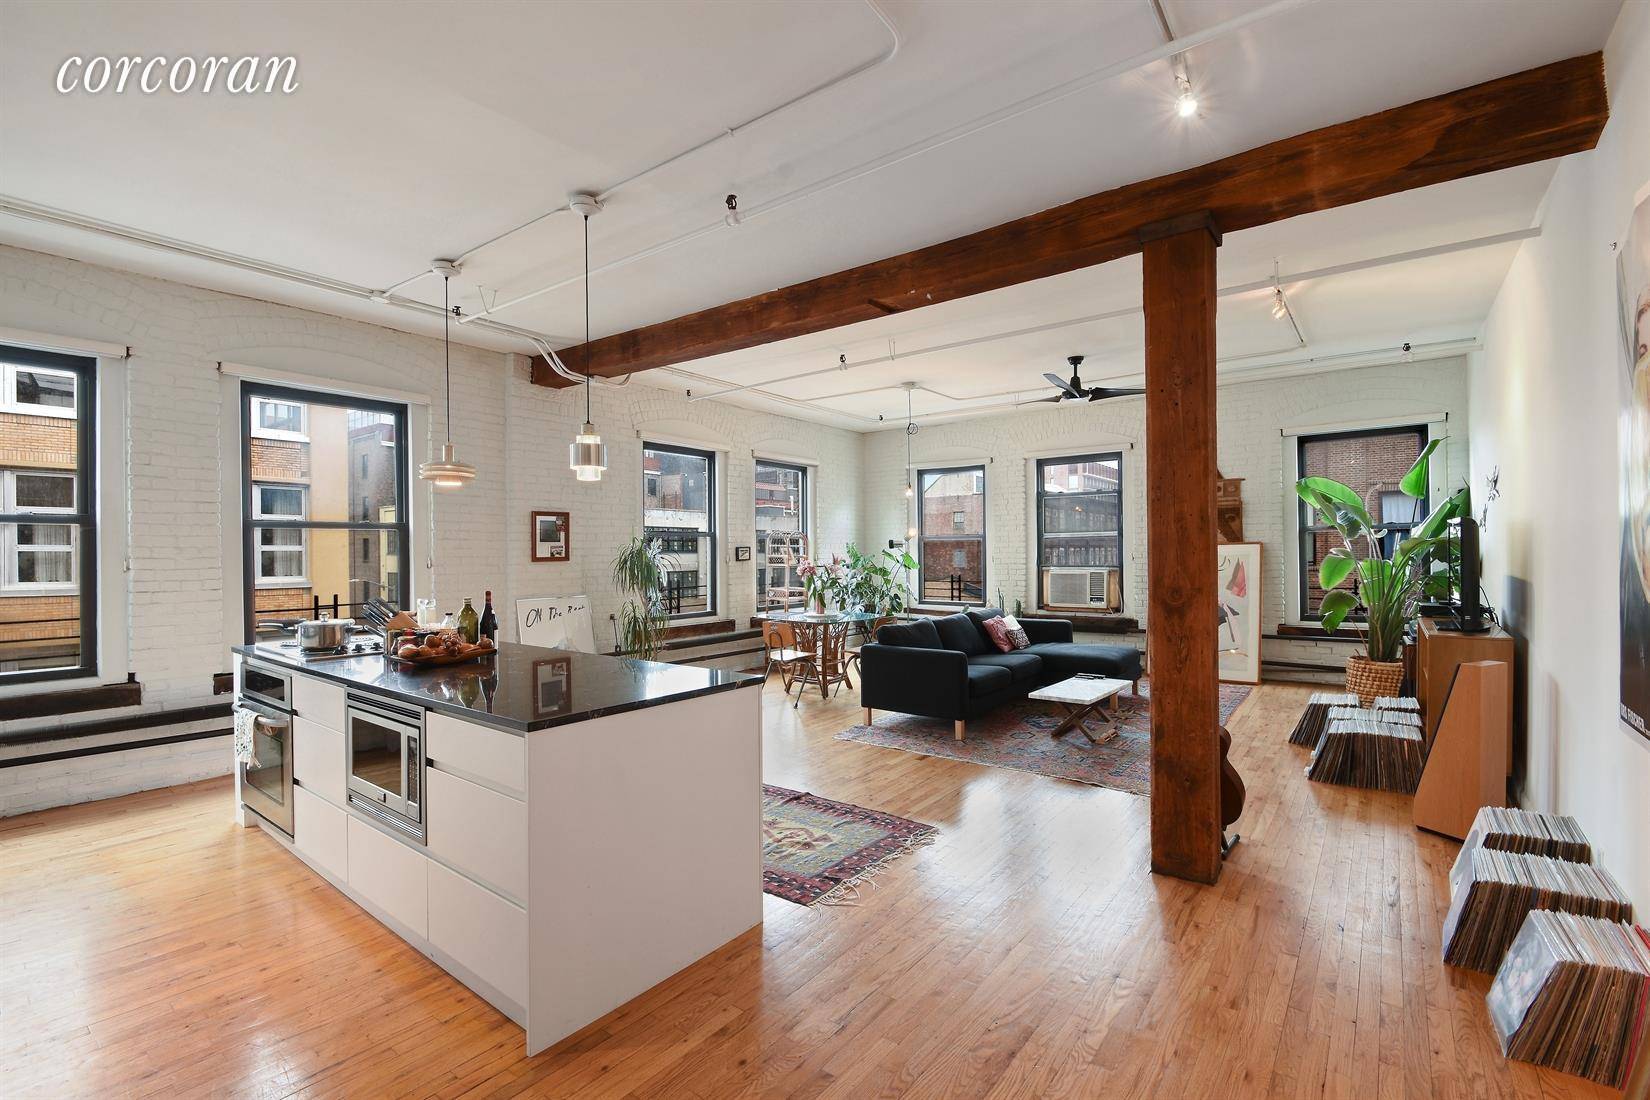 For Nov 1 Stunning 3 Bed, 2 Bath Williamsburg Corner Loft Residence located in the epicenter of Williamsburgs Northside !